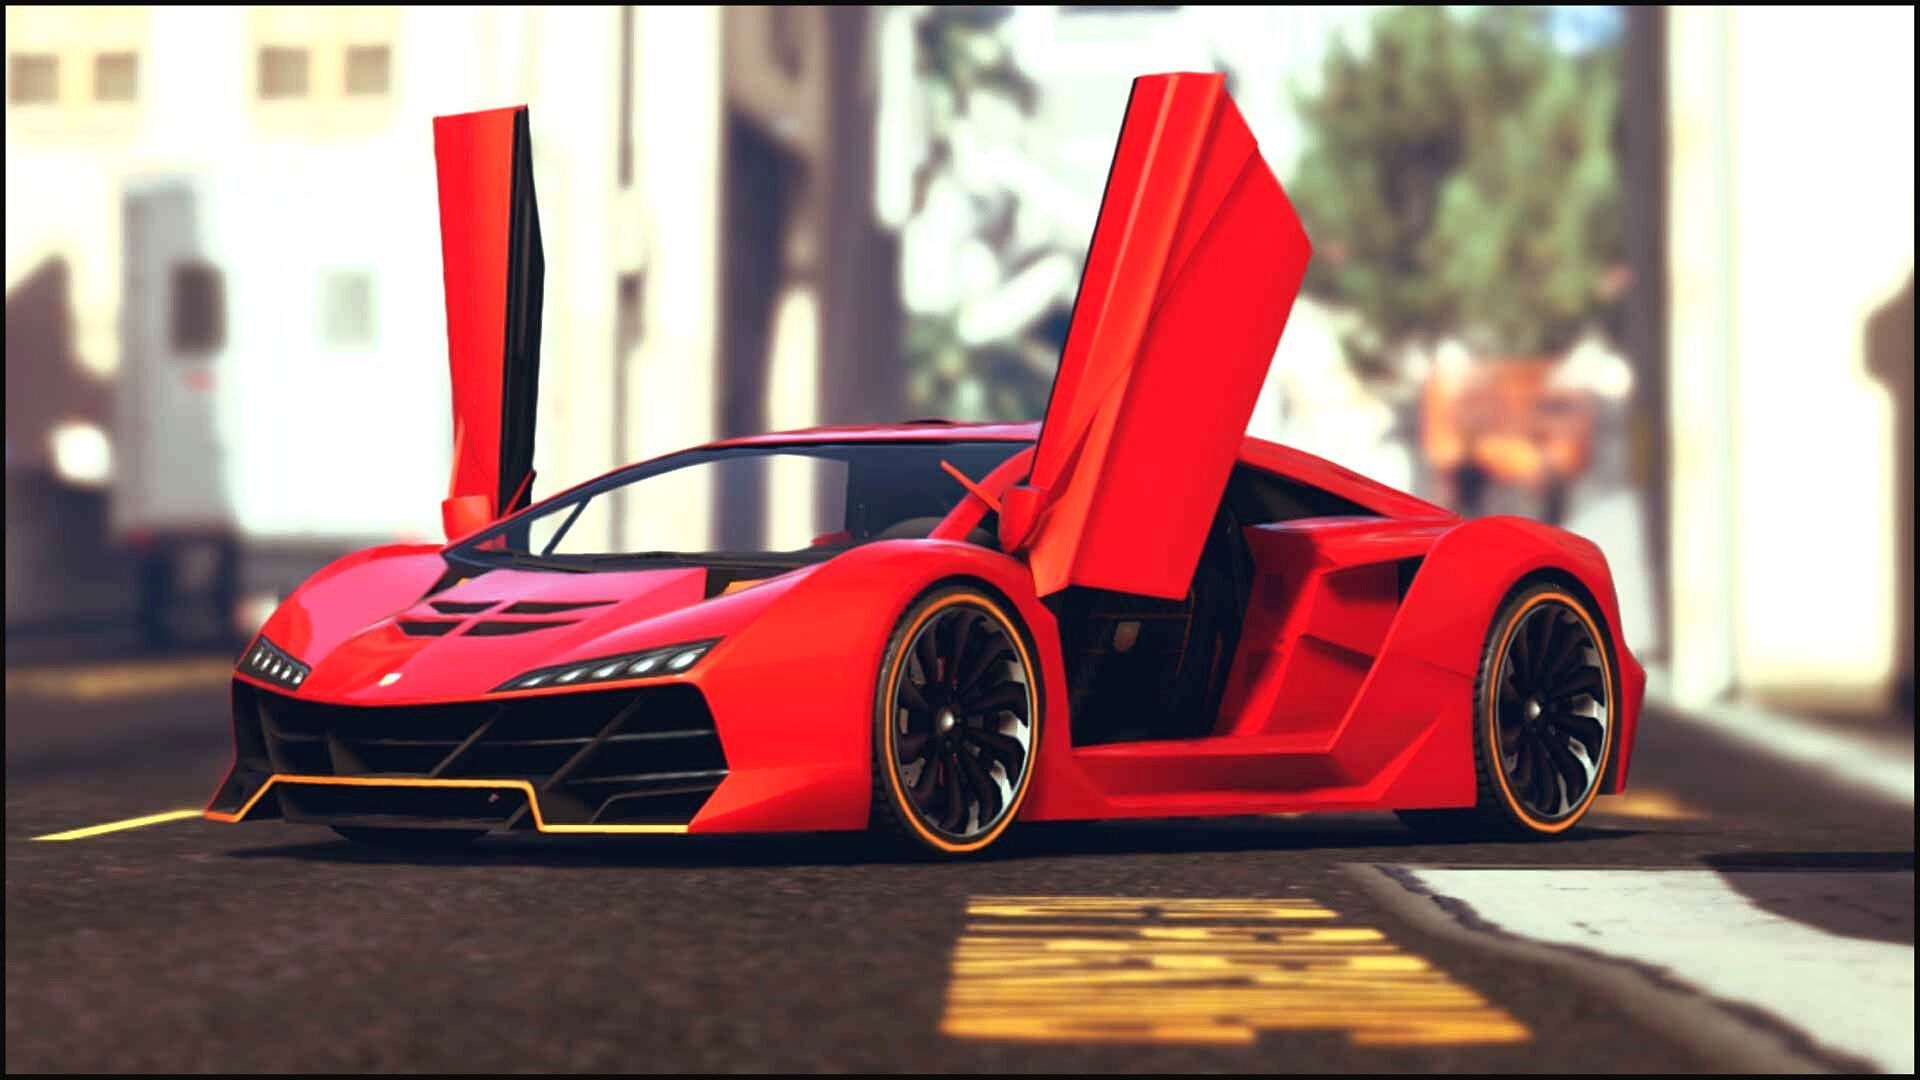 The Zentorno in GTA Online is available at a massive discount this week (Image via Rockstar Games)